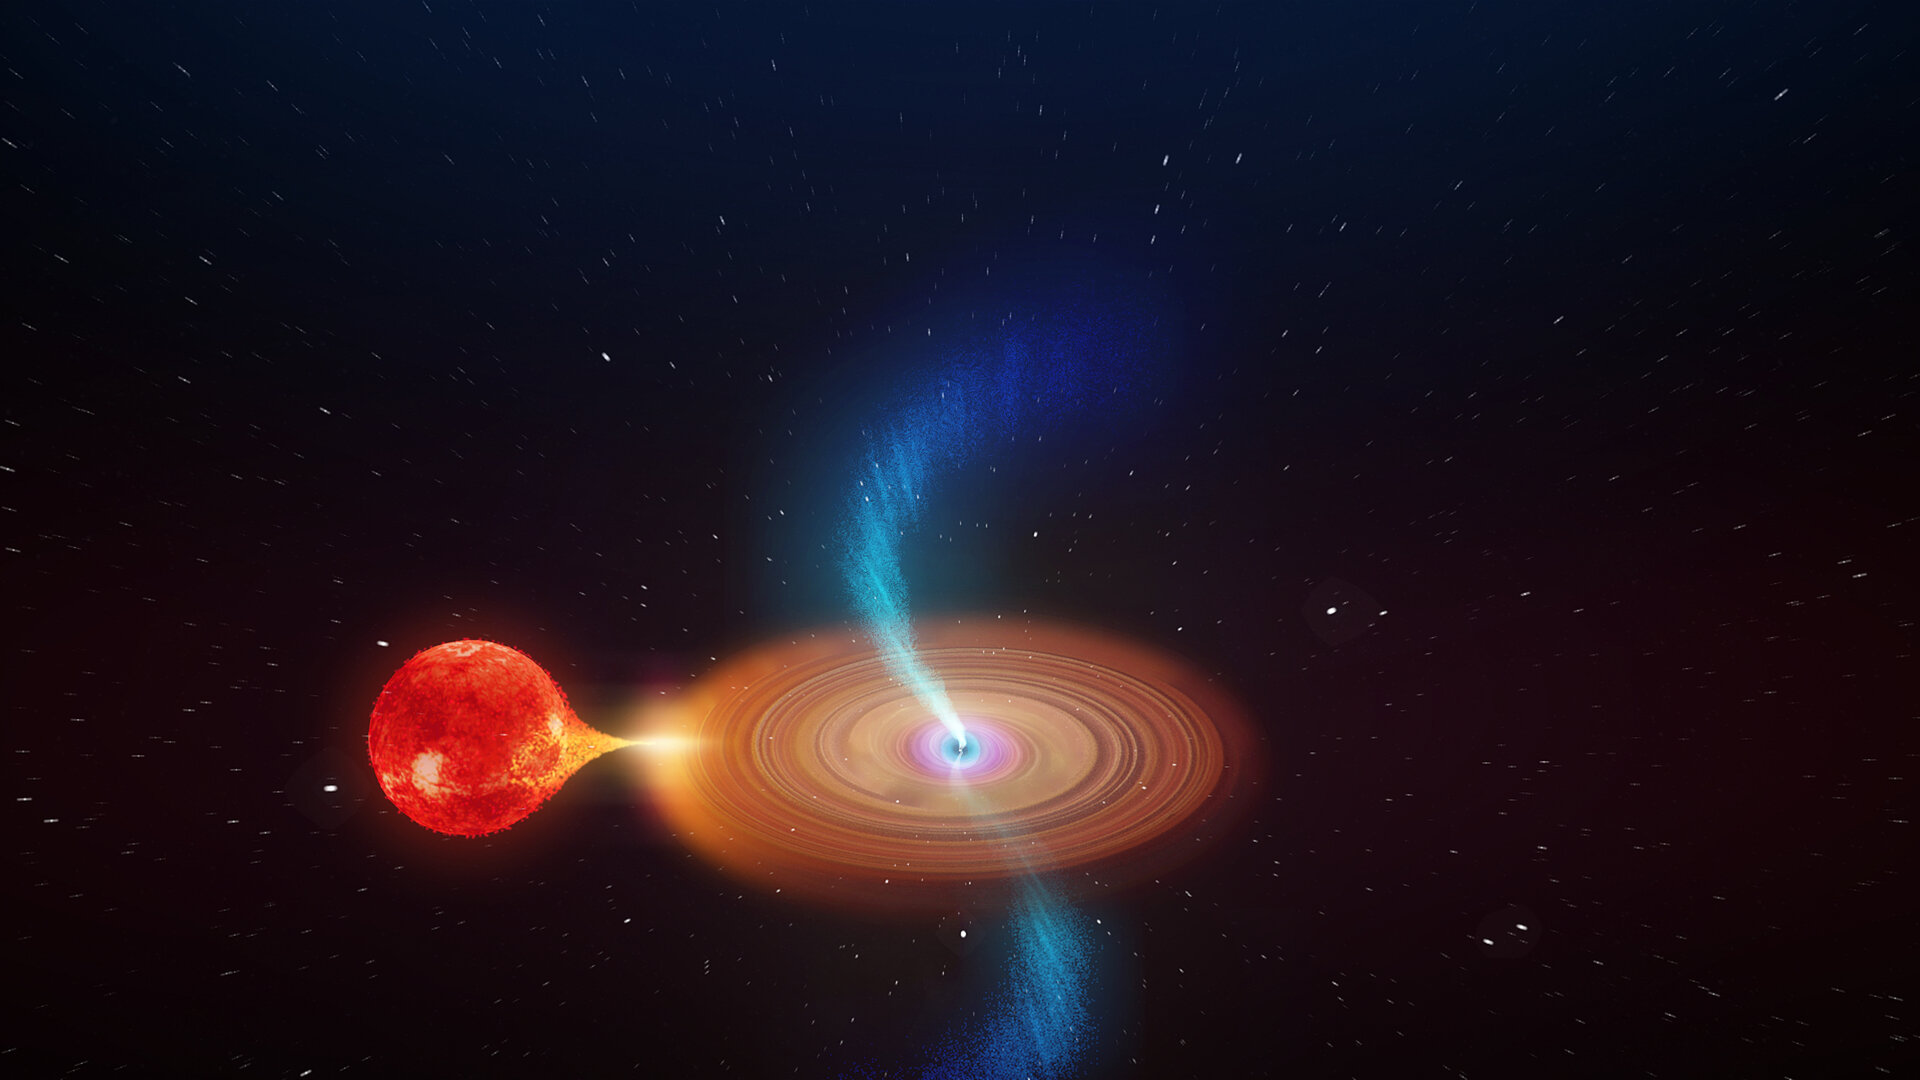 A dark background with a hazy disk connected to a bright red star. Blue jets protrude from the disk.